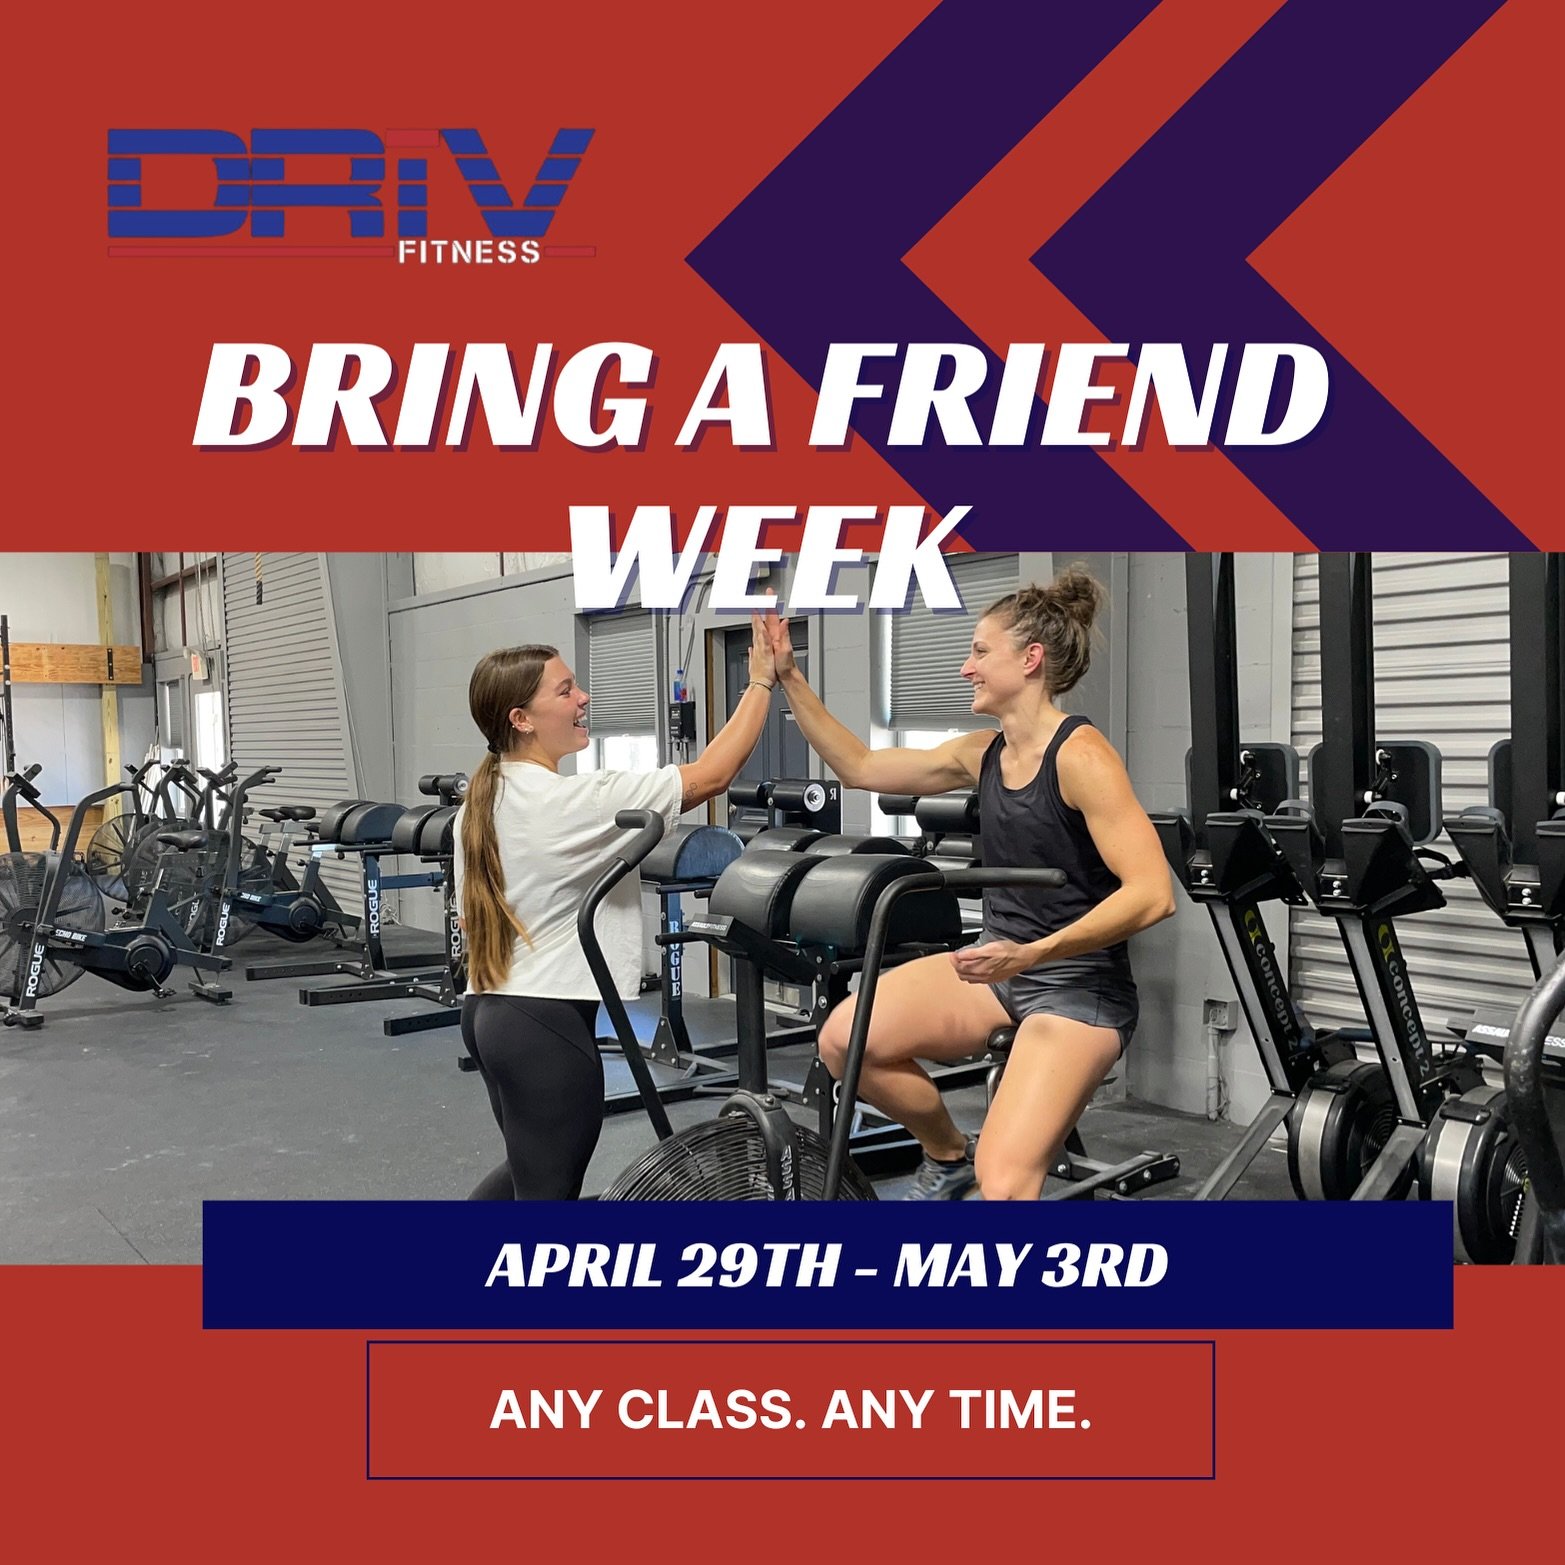 We have a lot in store for you this week!

Bring your friends to any class, all week long, FOR FREE. 

Monday can&rsquo;t get here soon enough!